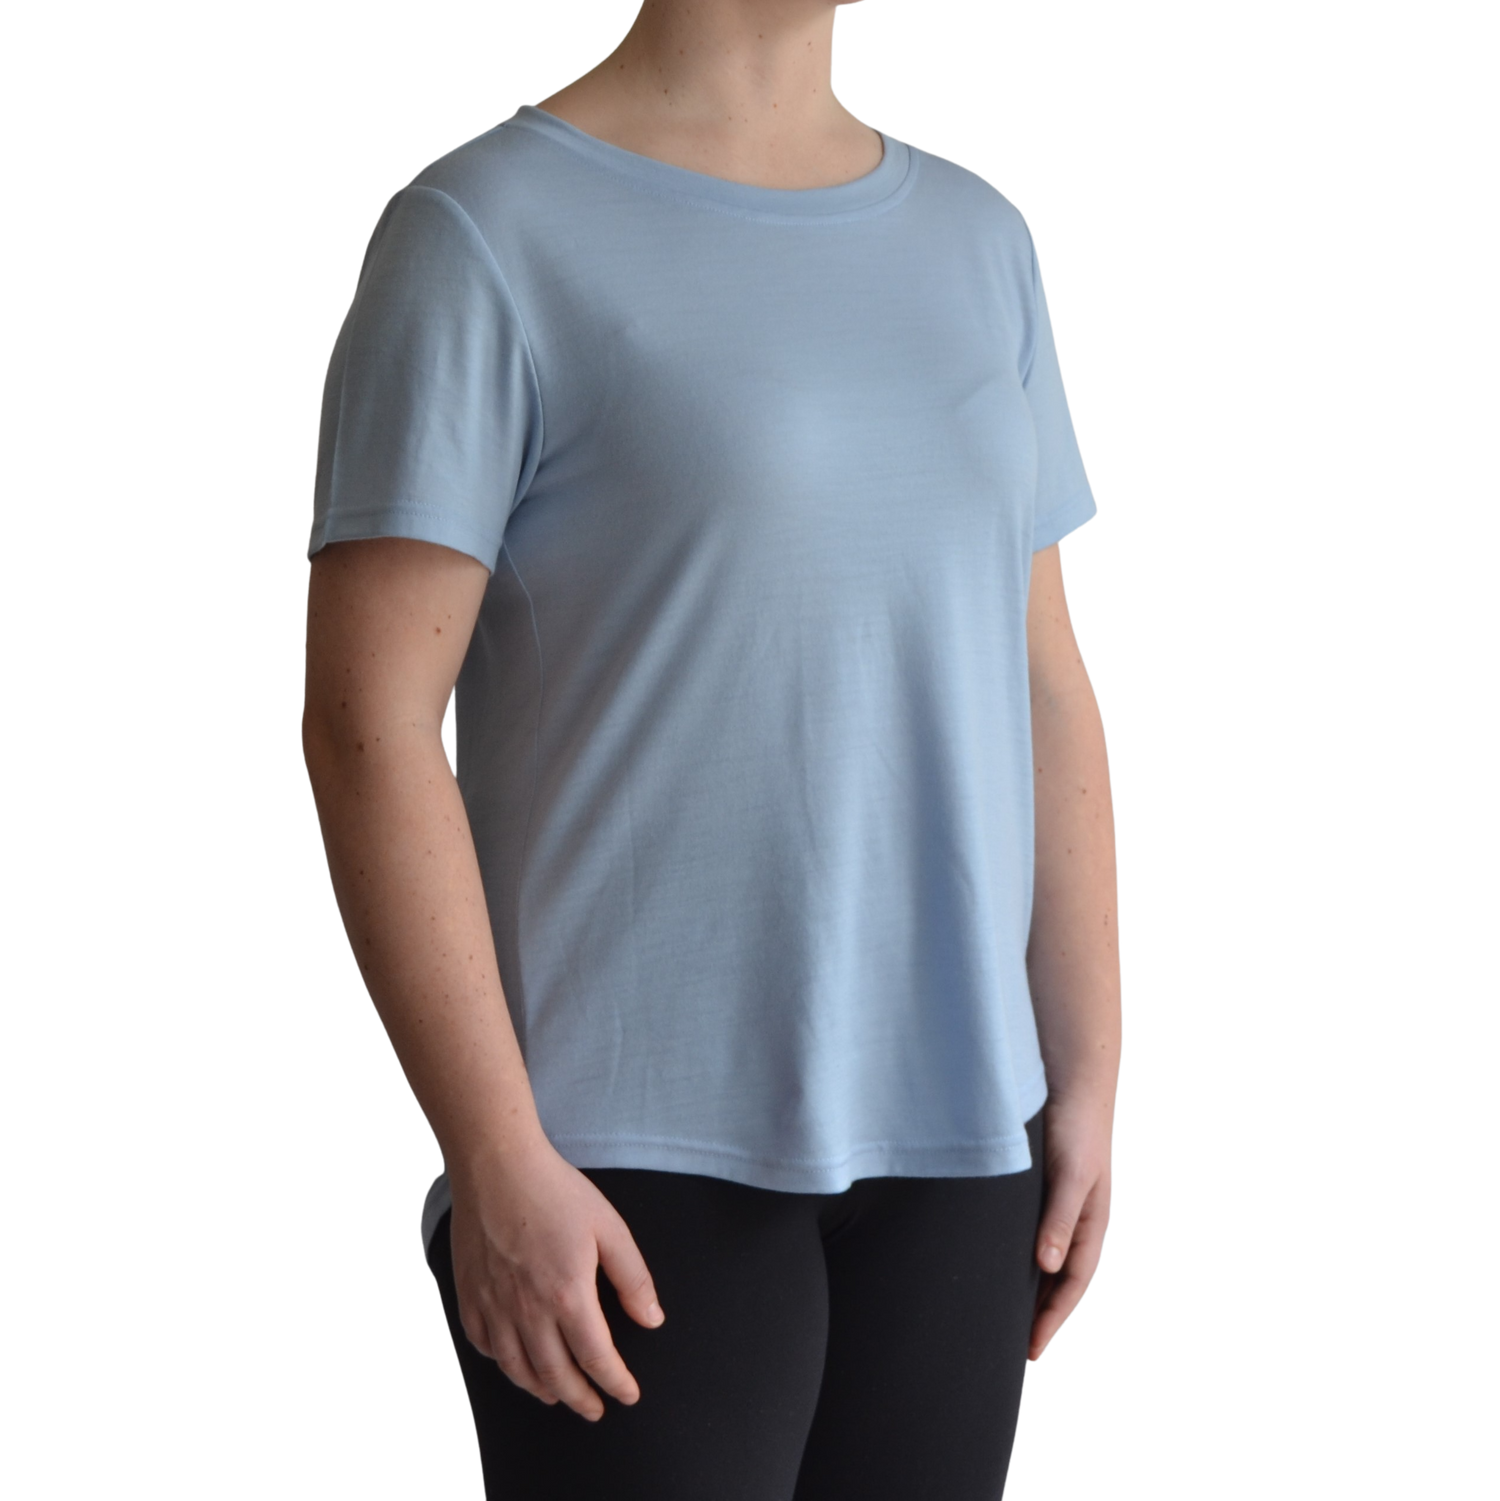 Links merino short sleeve t-shirt in ice blue. Model faces forward on a 45 degree angle